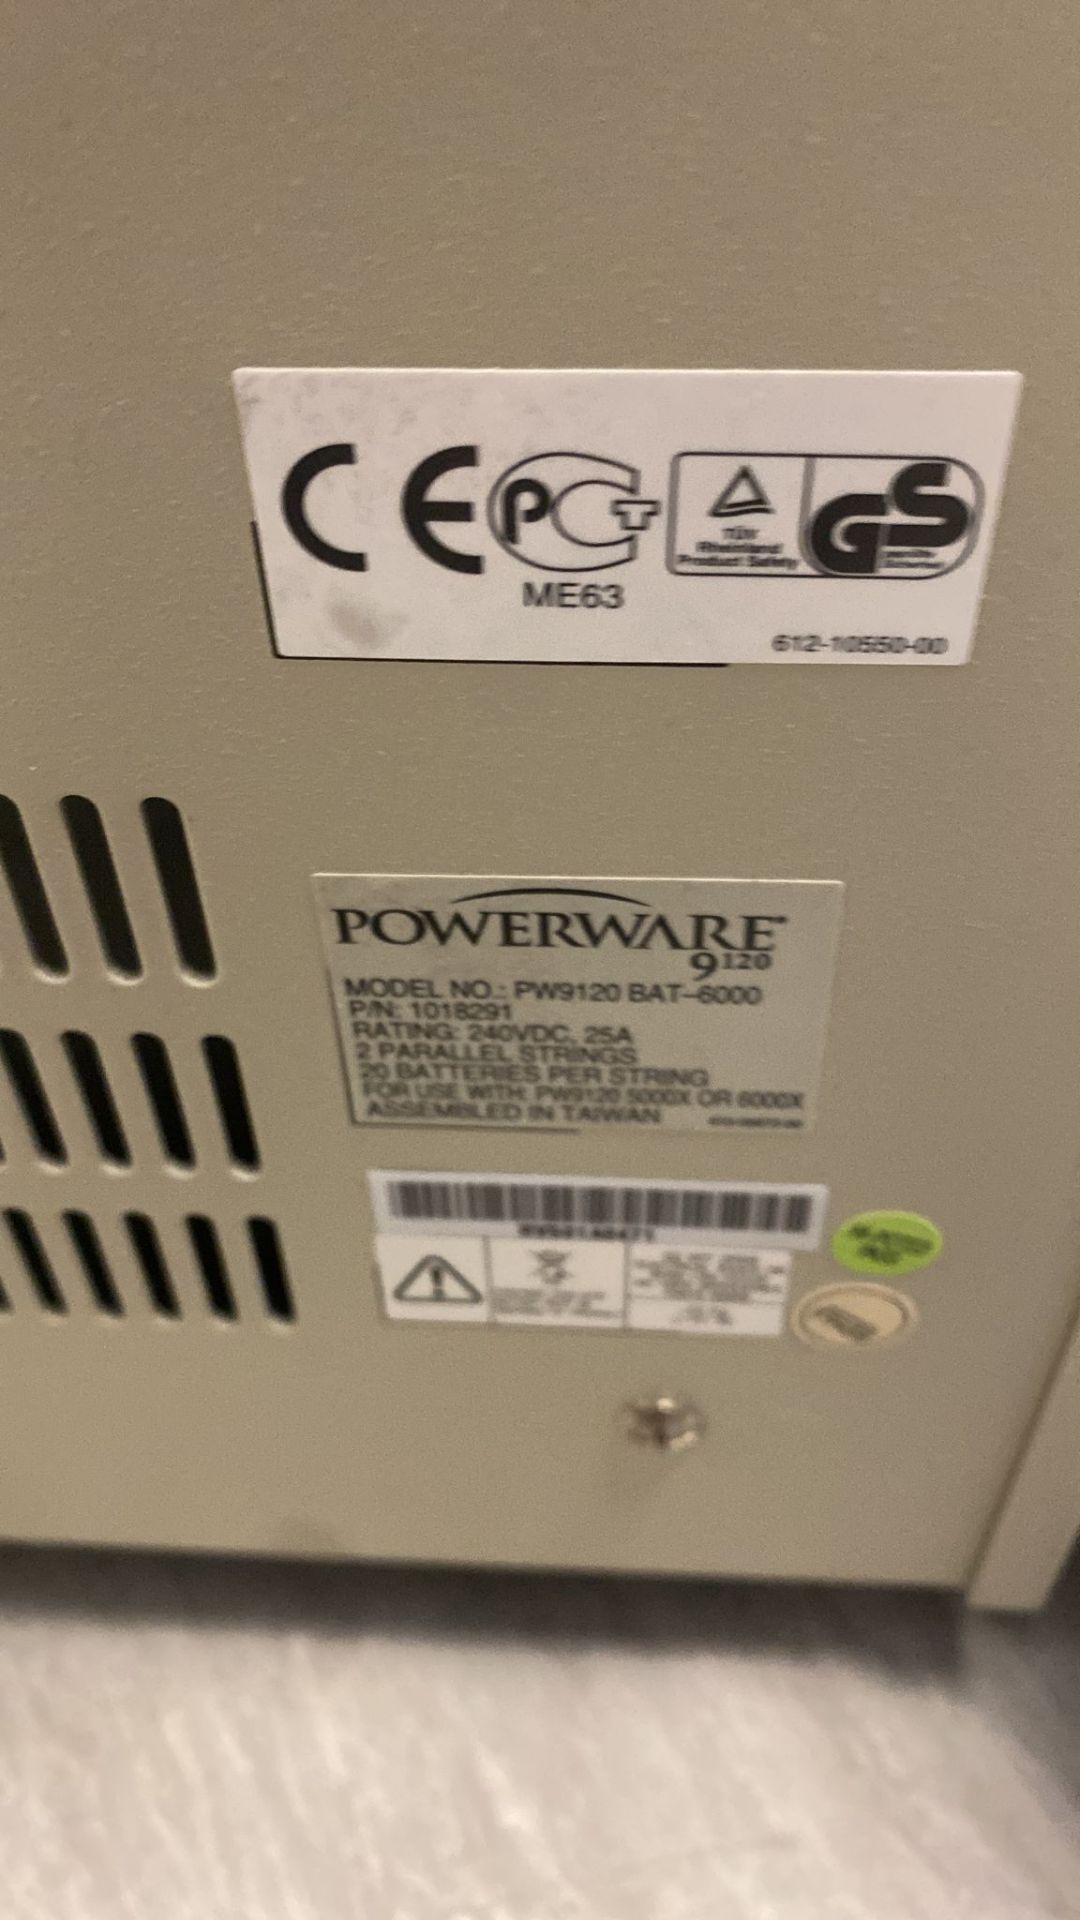 1 x Powerware 9 Series 6000 Tower UPS With Extra Battery Pack Tower - 700-6000 VA - Image 5 of 6